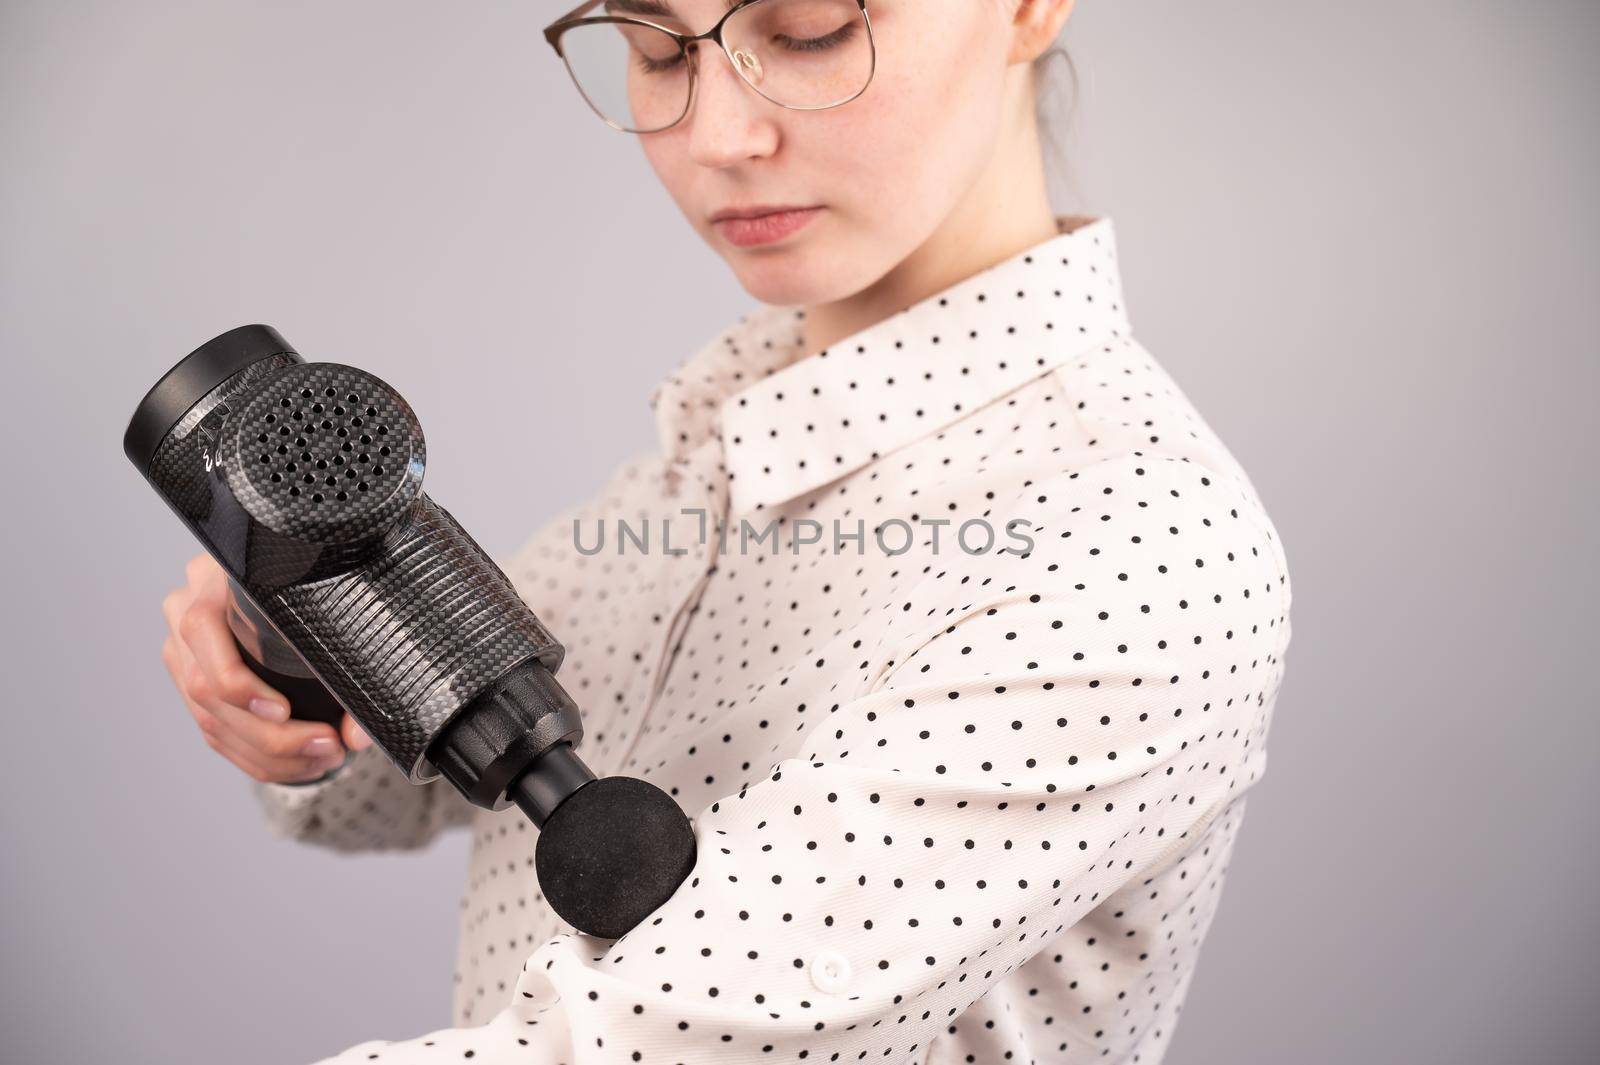 Caucasian business woman massaging her biceps with a percussion massager